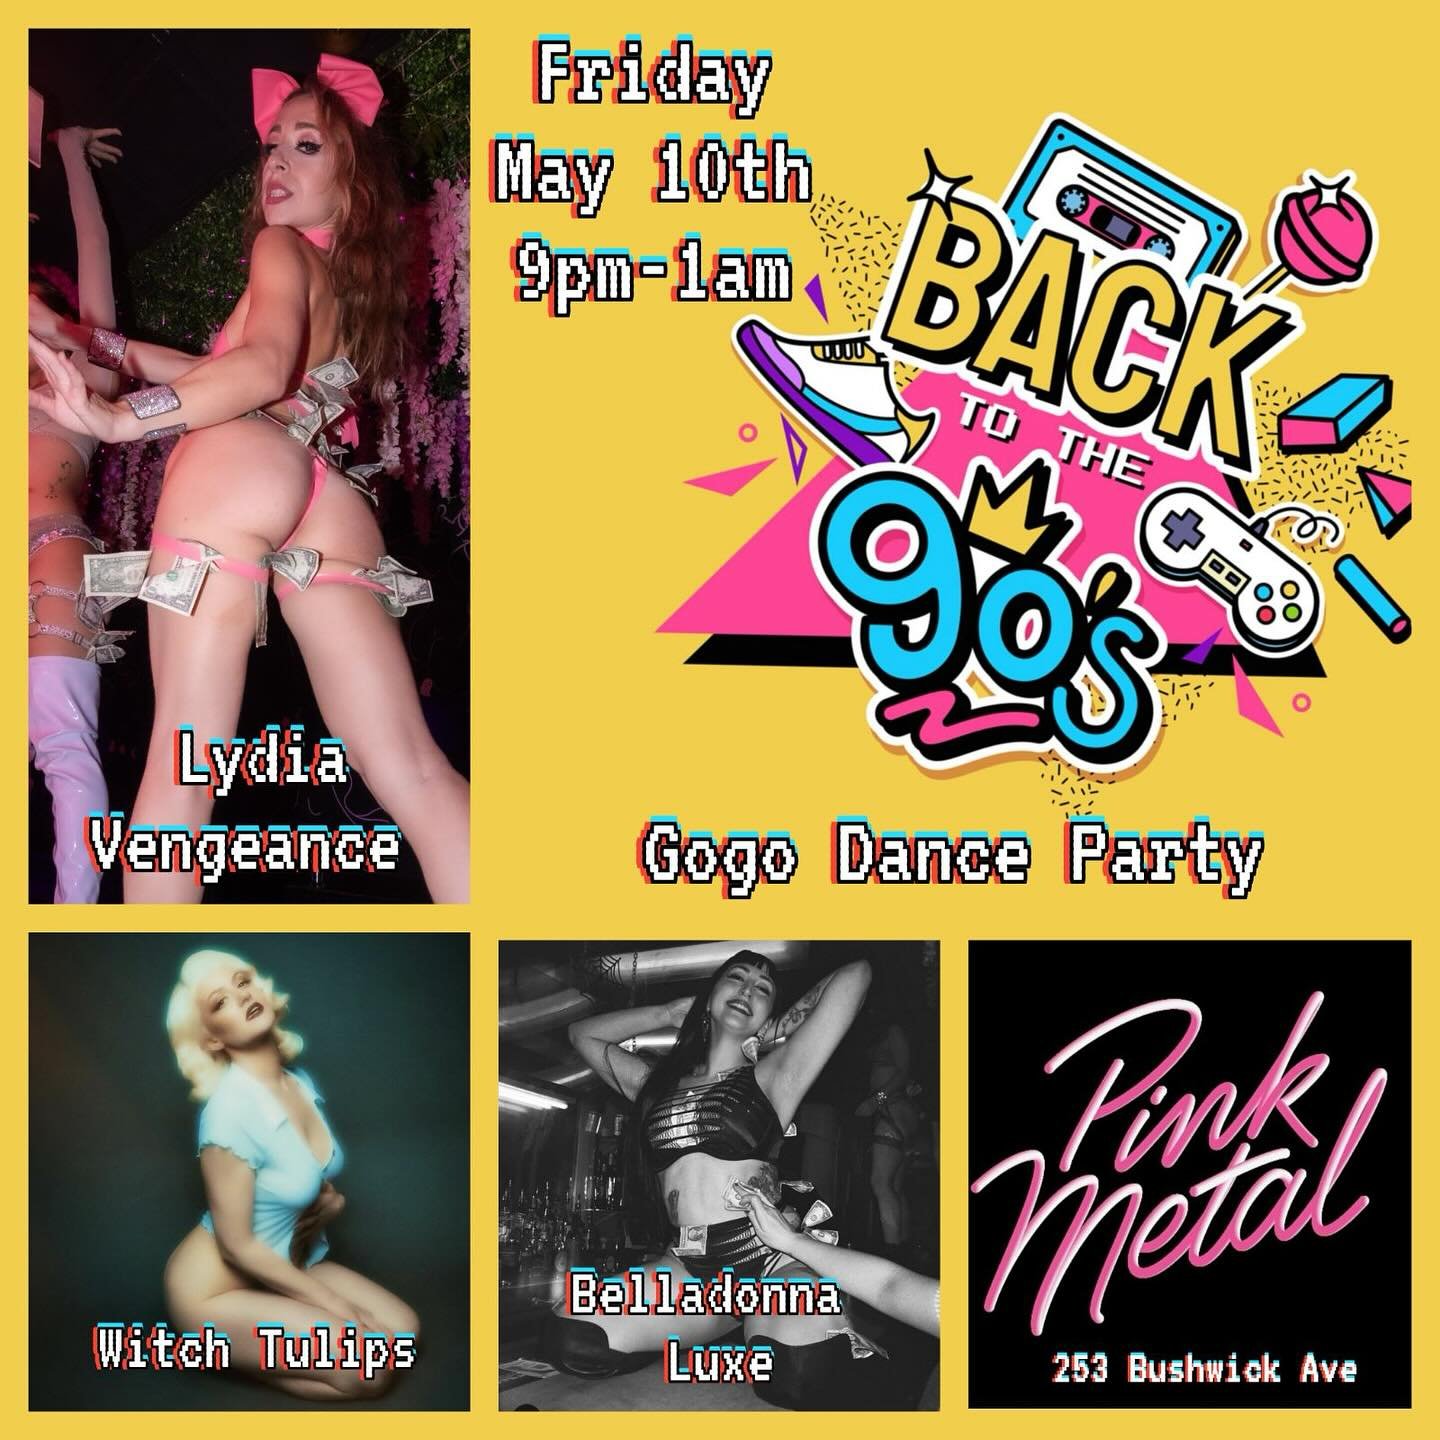 Back to the 90s dance party! Tomorrow (Fri 5/10) 9pm- 1am featuring gogo by @lydiavengeance @witchtulips and @belladonna_luxe 💖 NO COVER! Be sure to bring those tips 💸